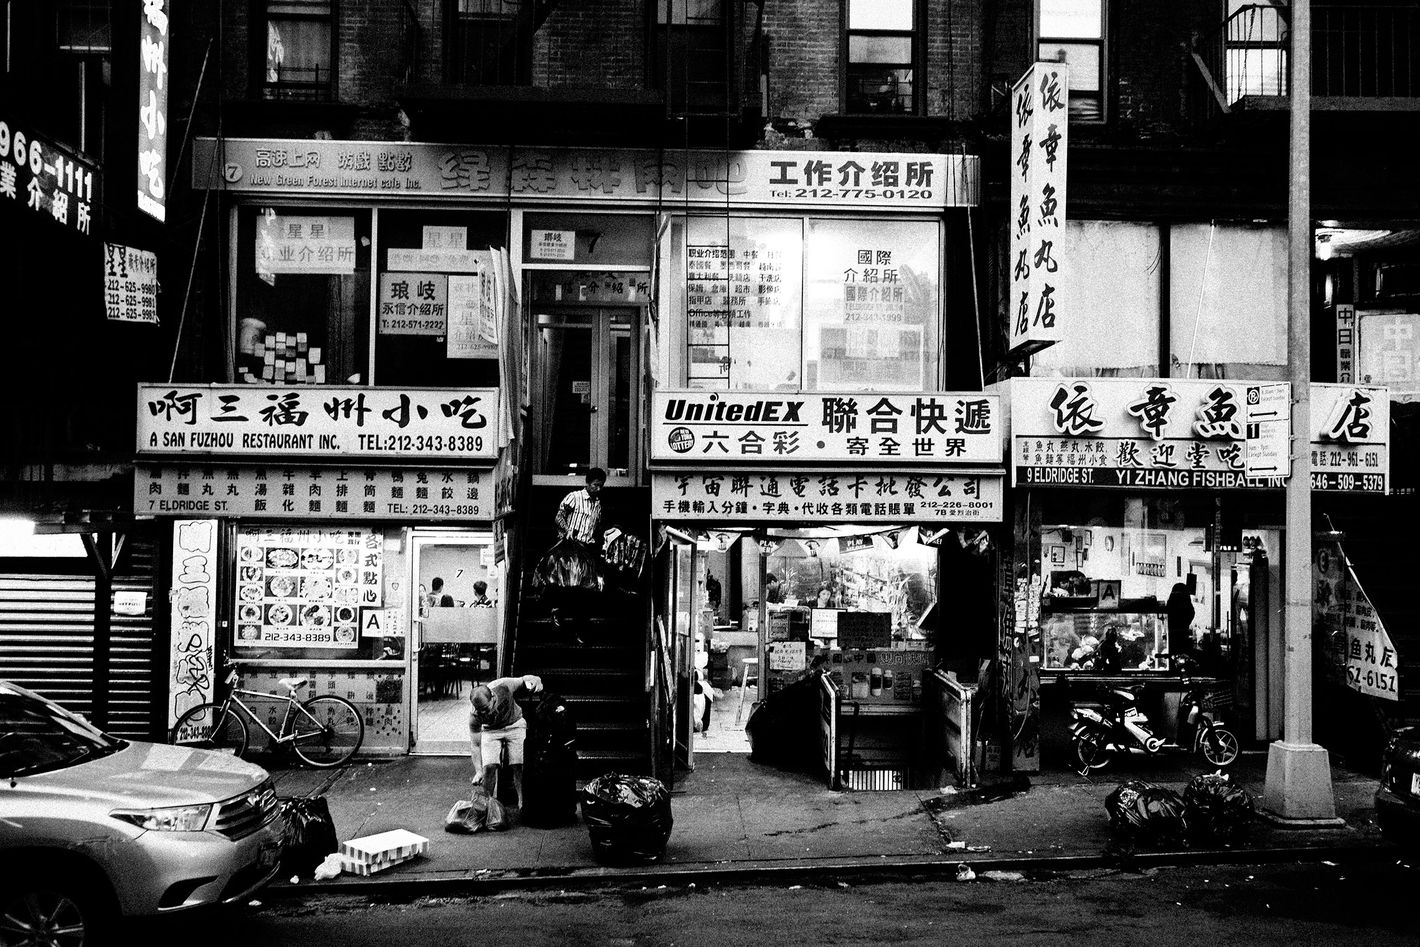 WHAT TO DO IN NYC + CHINATOWN BARGAINING TIPS